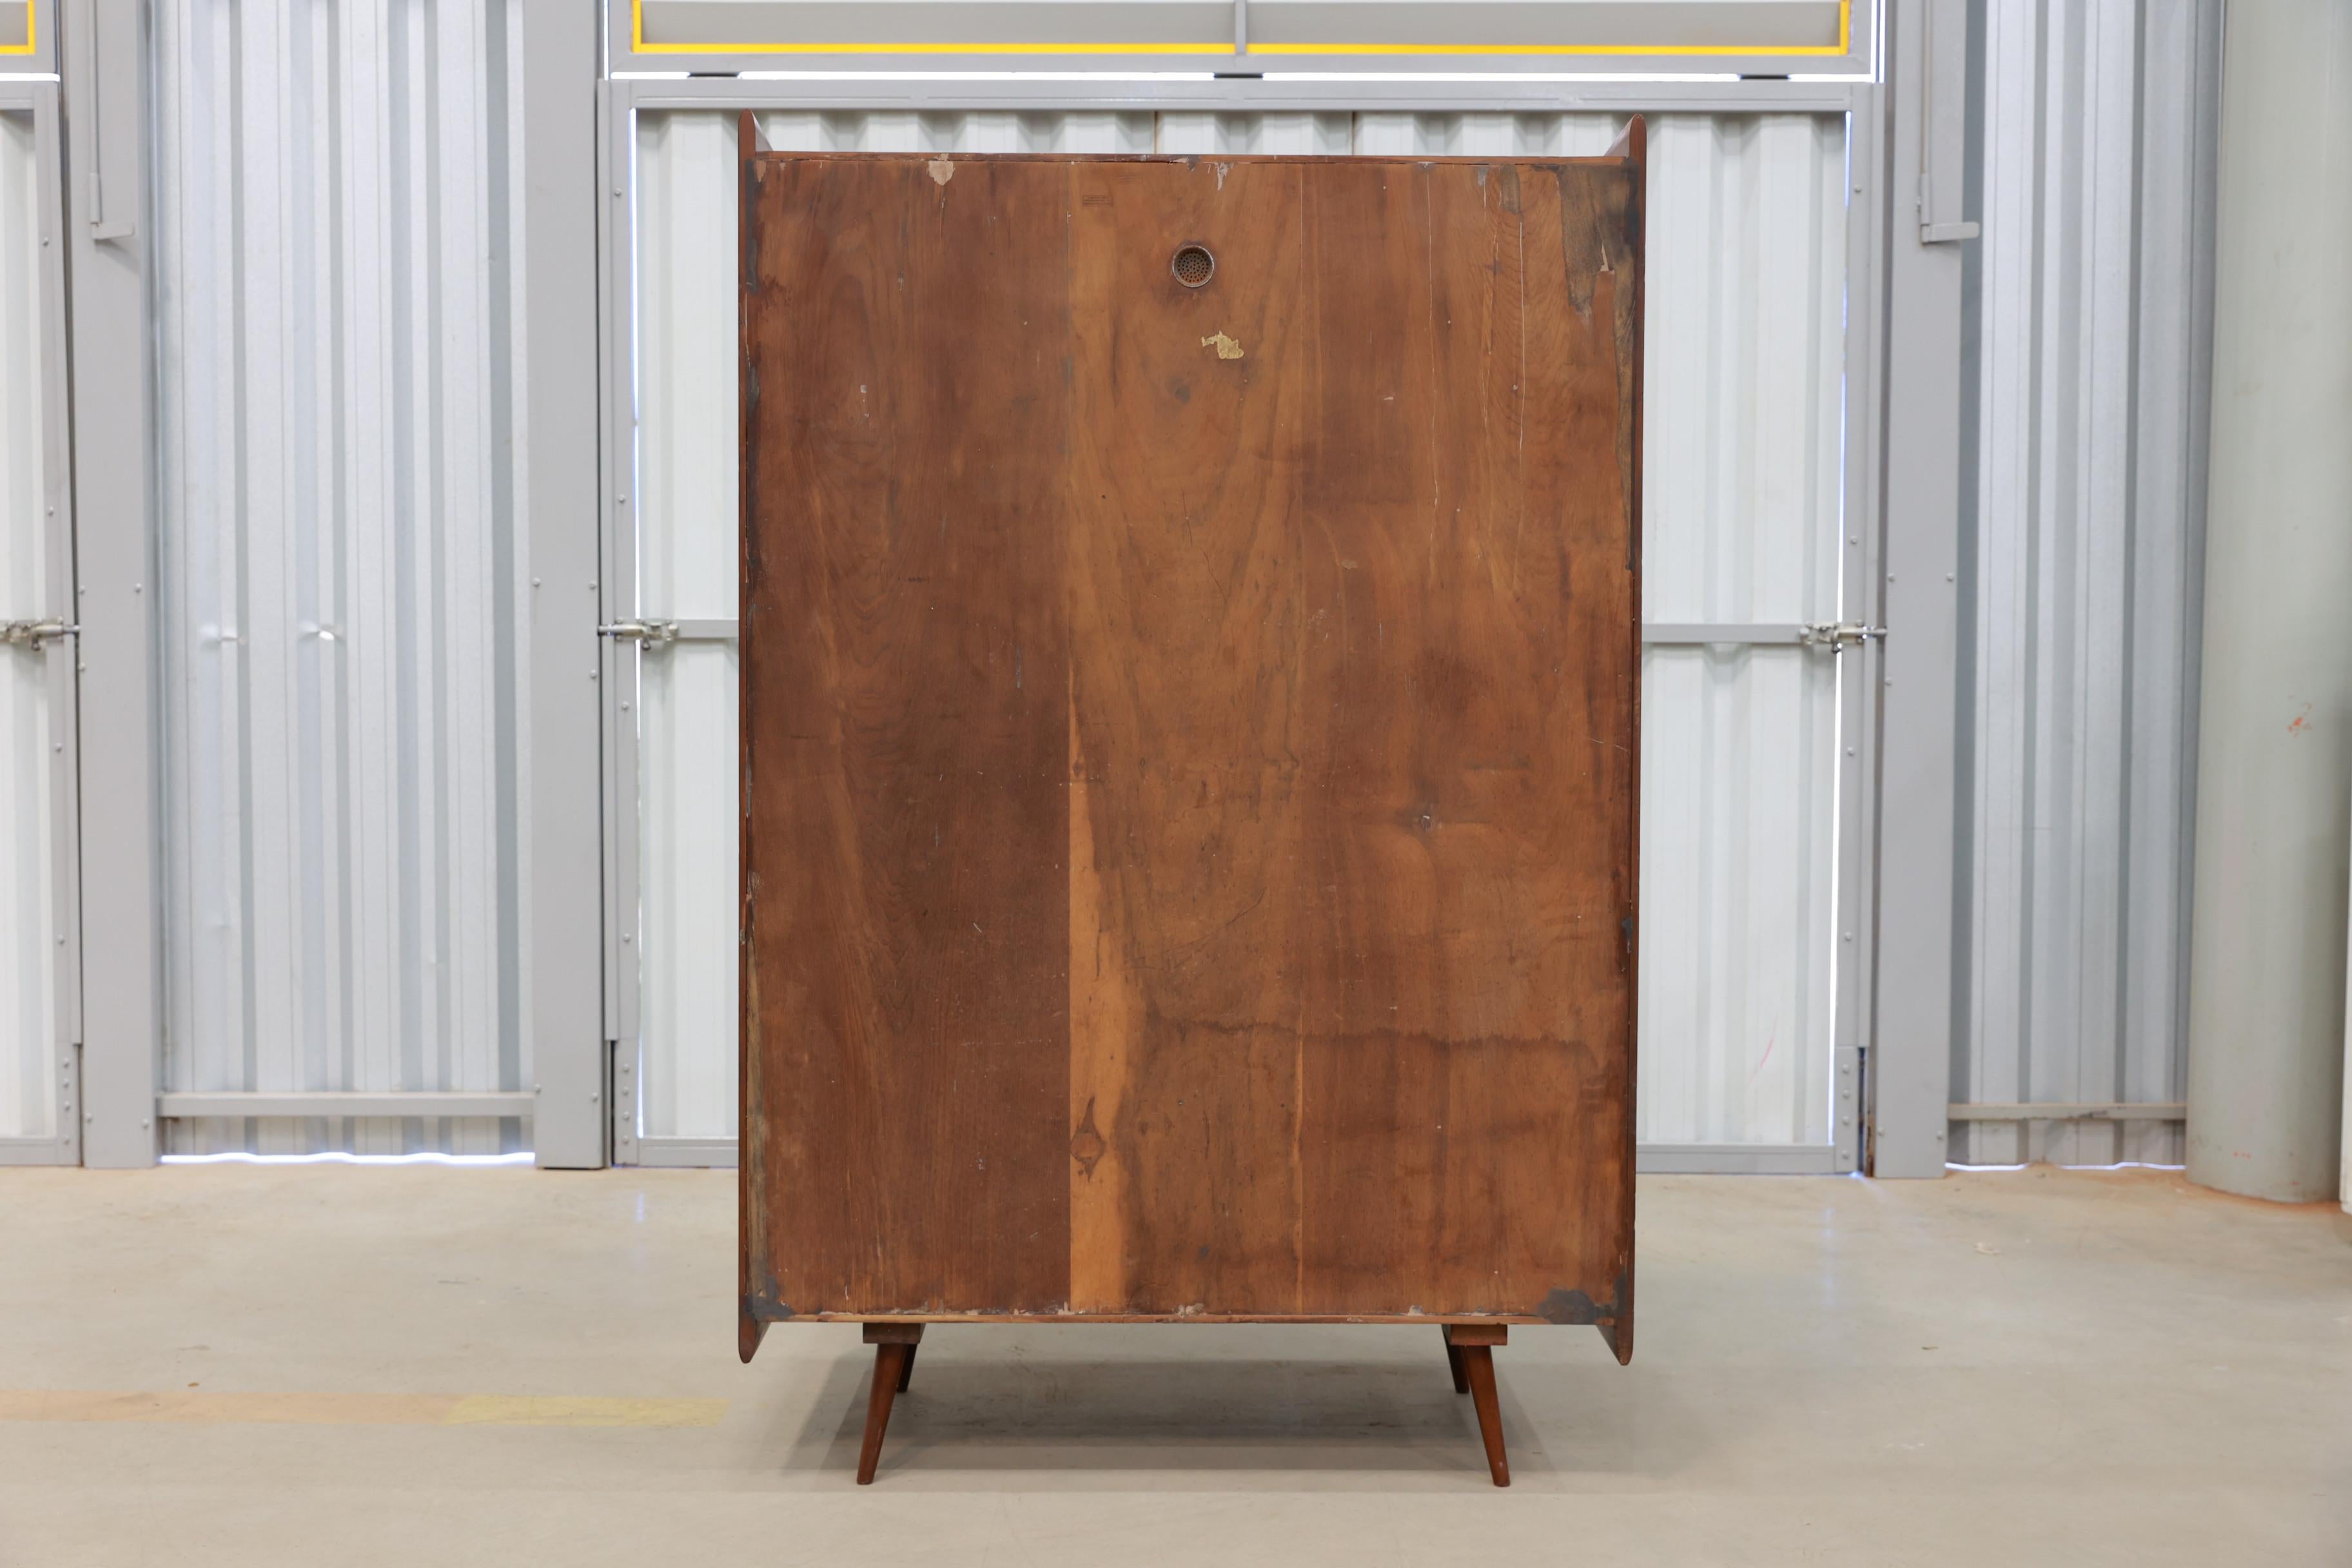 Brazilian Modern Armoire in Hardwood by Moveis Cimo, 1950s, Brazil For Sale 2